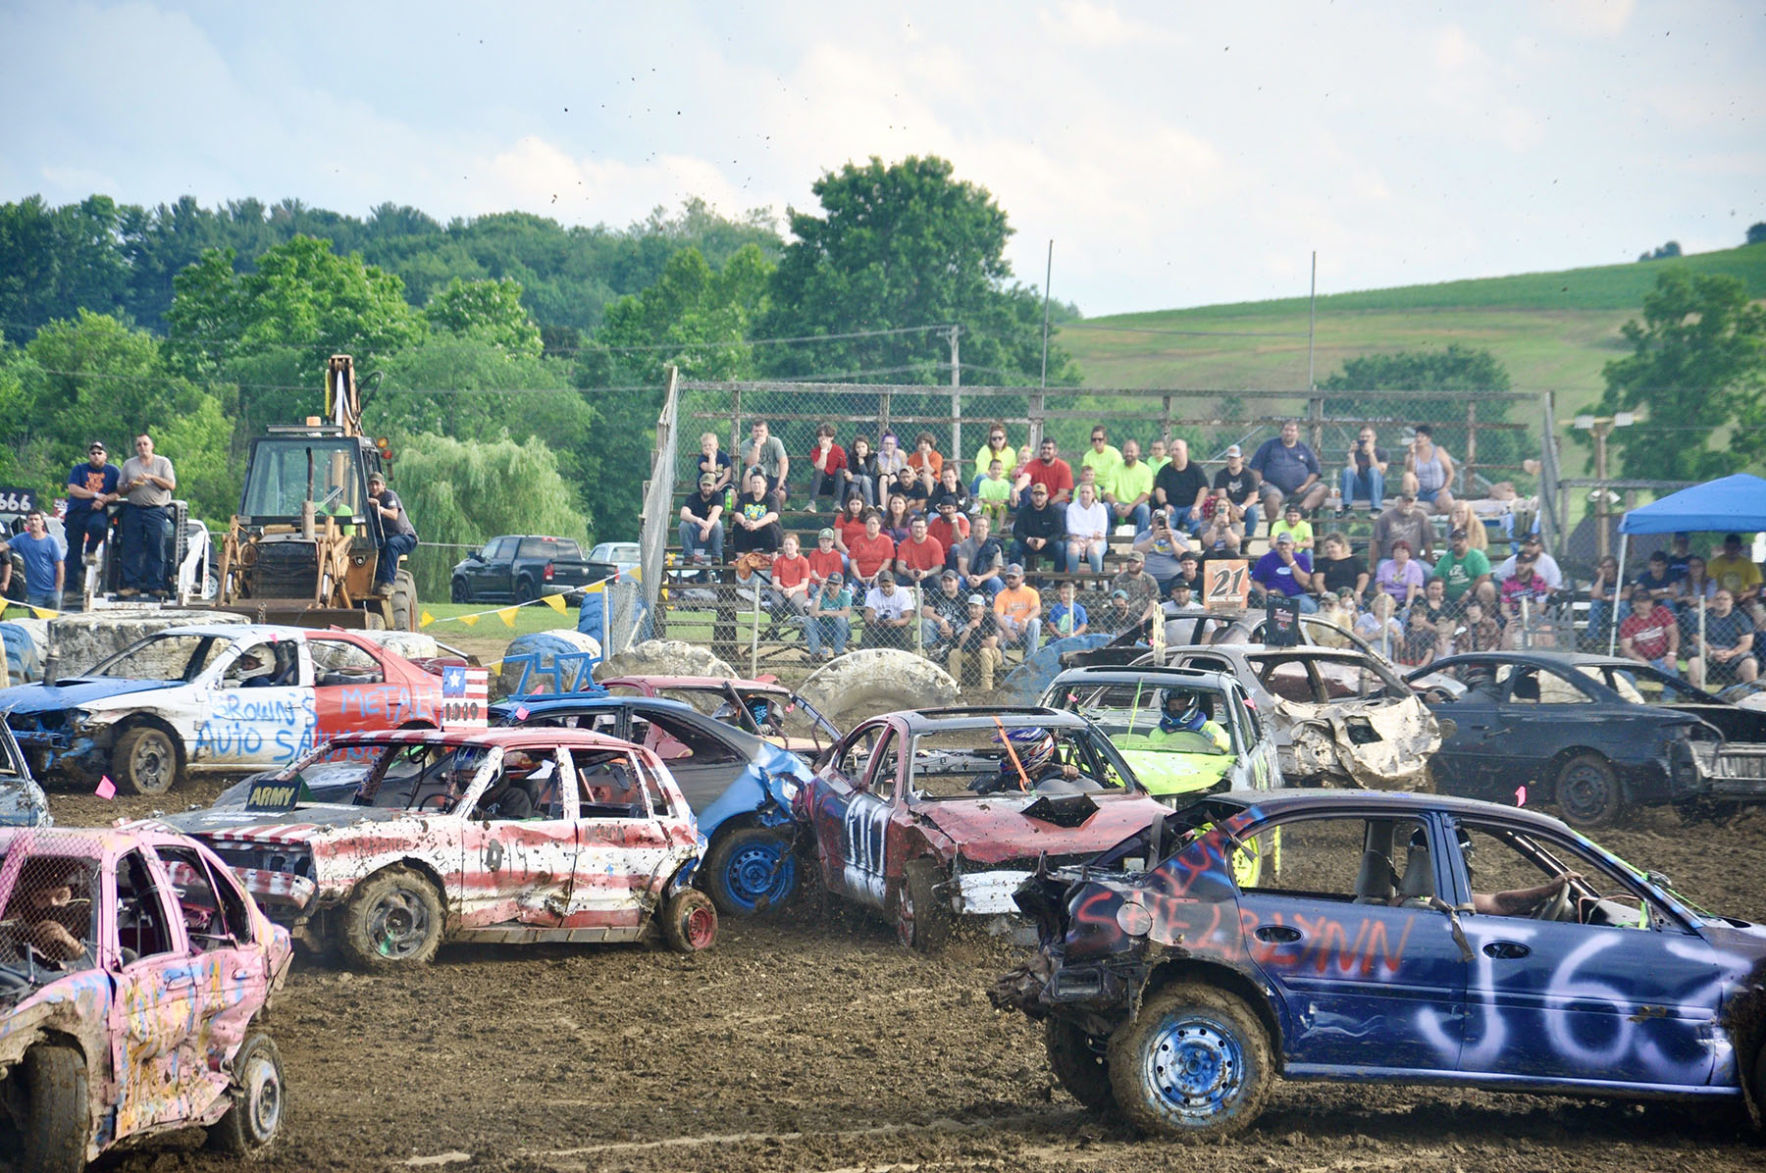 Salena Zito column Theres more than meets the eye at a demolition derby pic